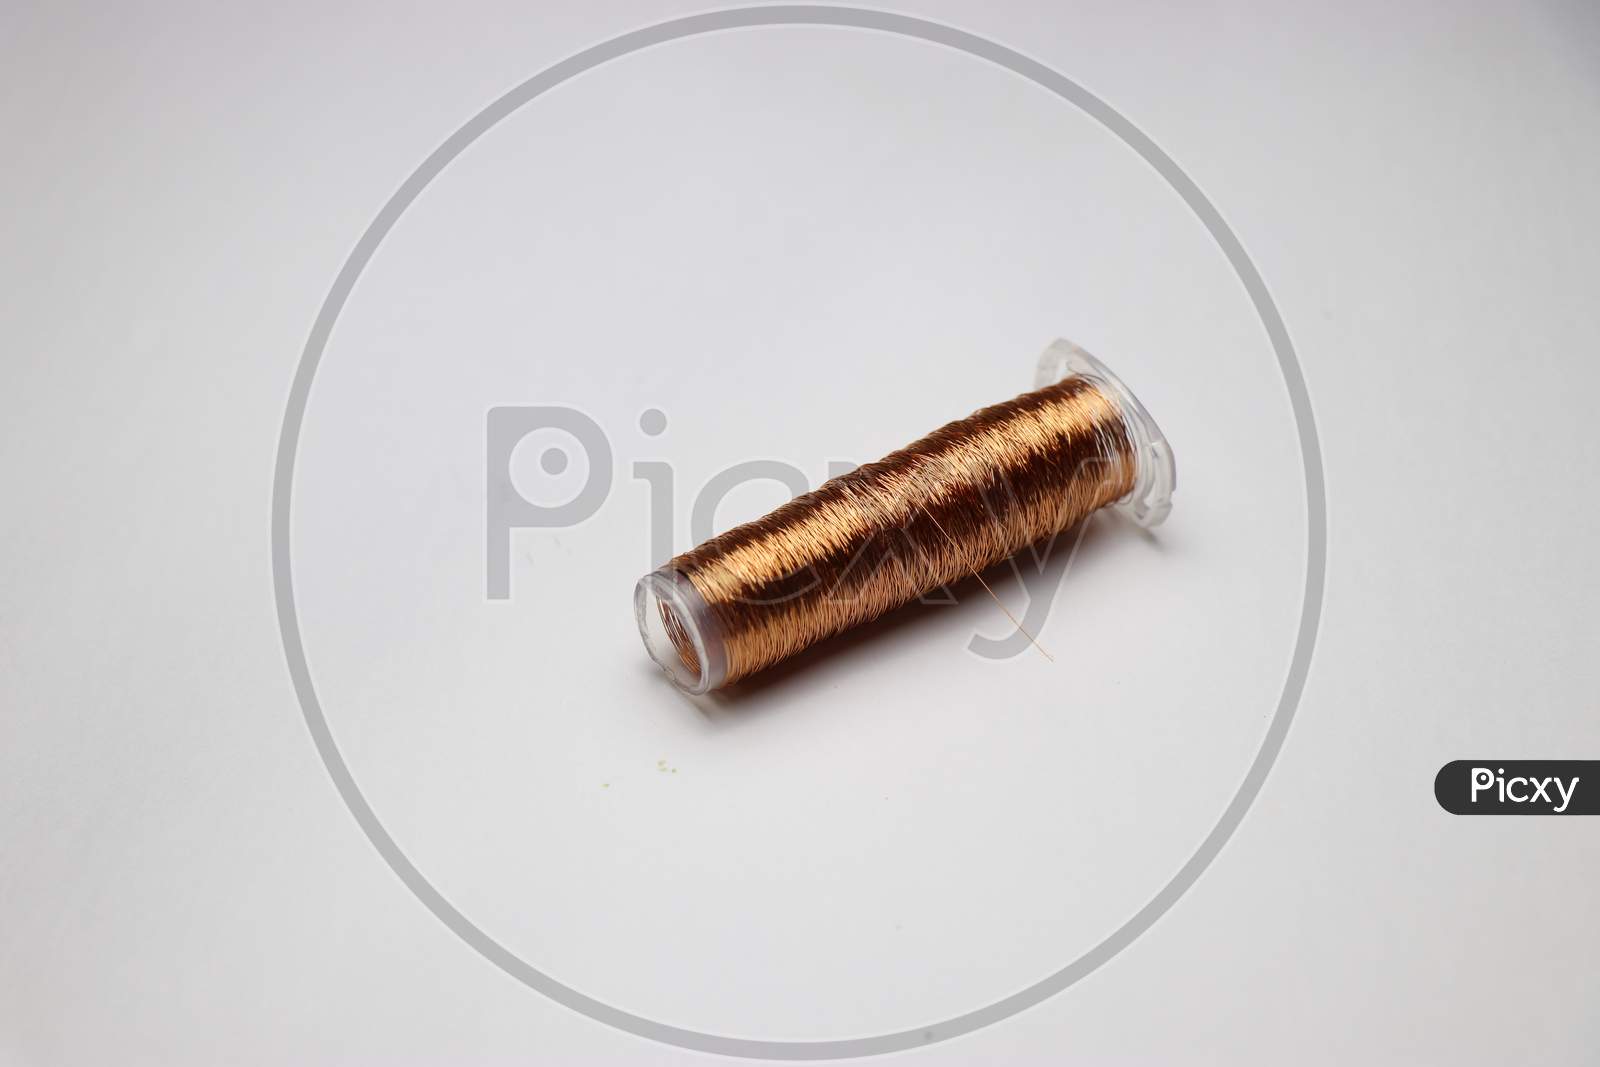 Enameled Copper Wire In A Spool Which Is Recycled From Old Dc Motor Rotor